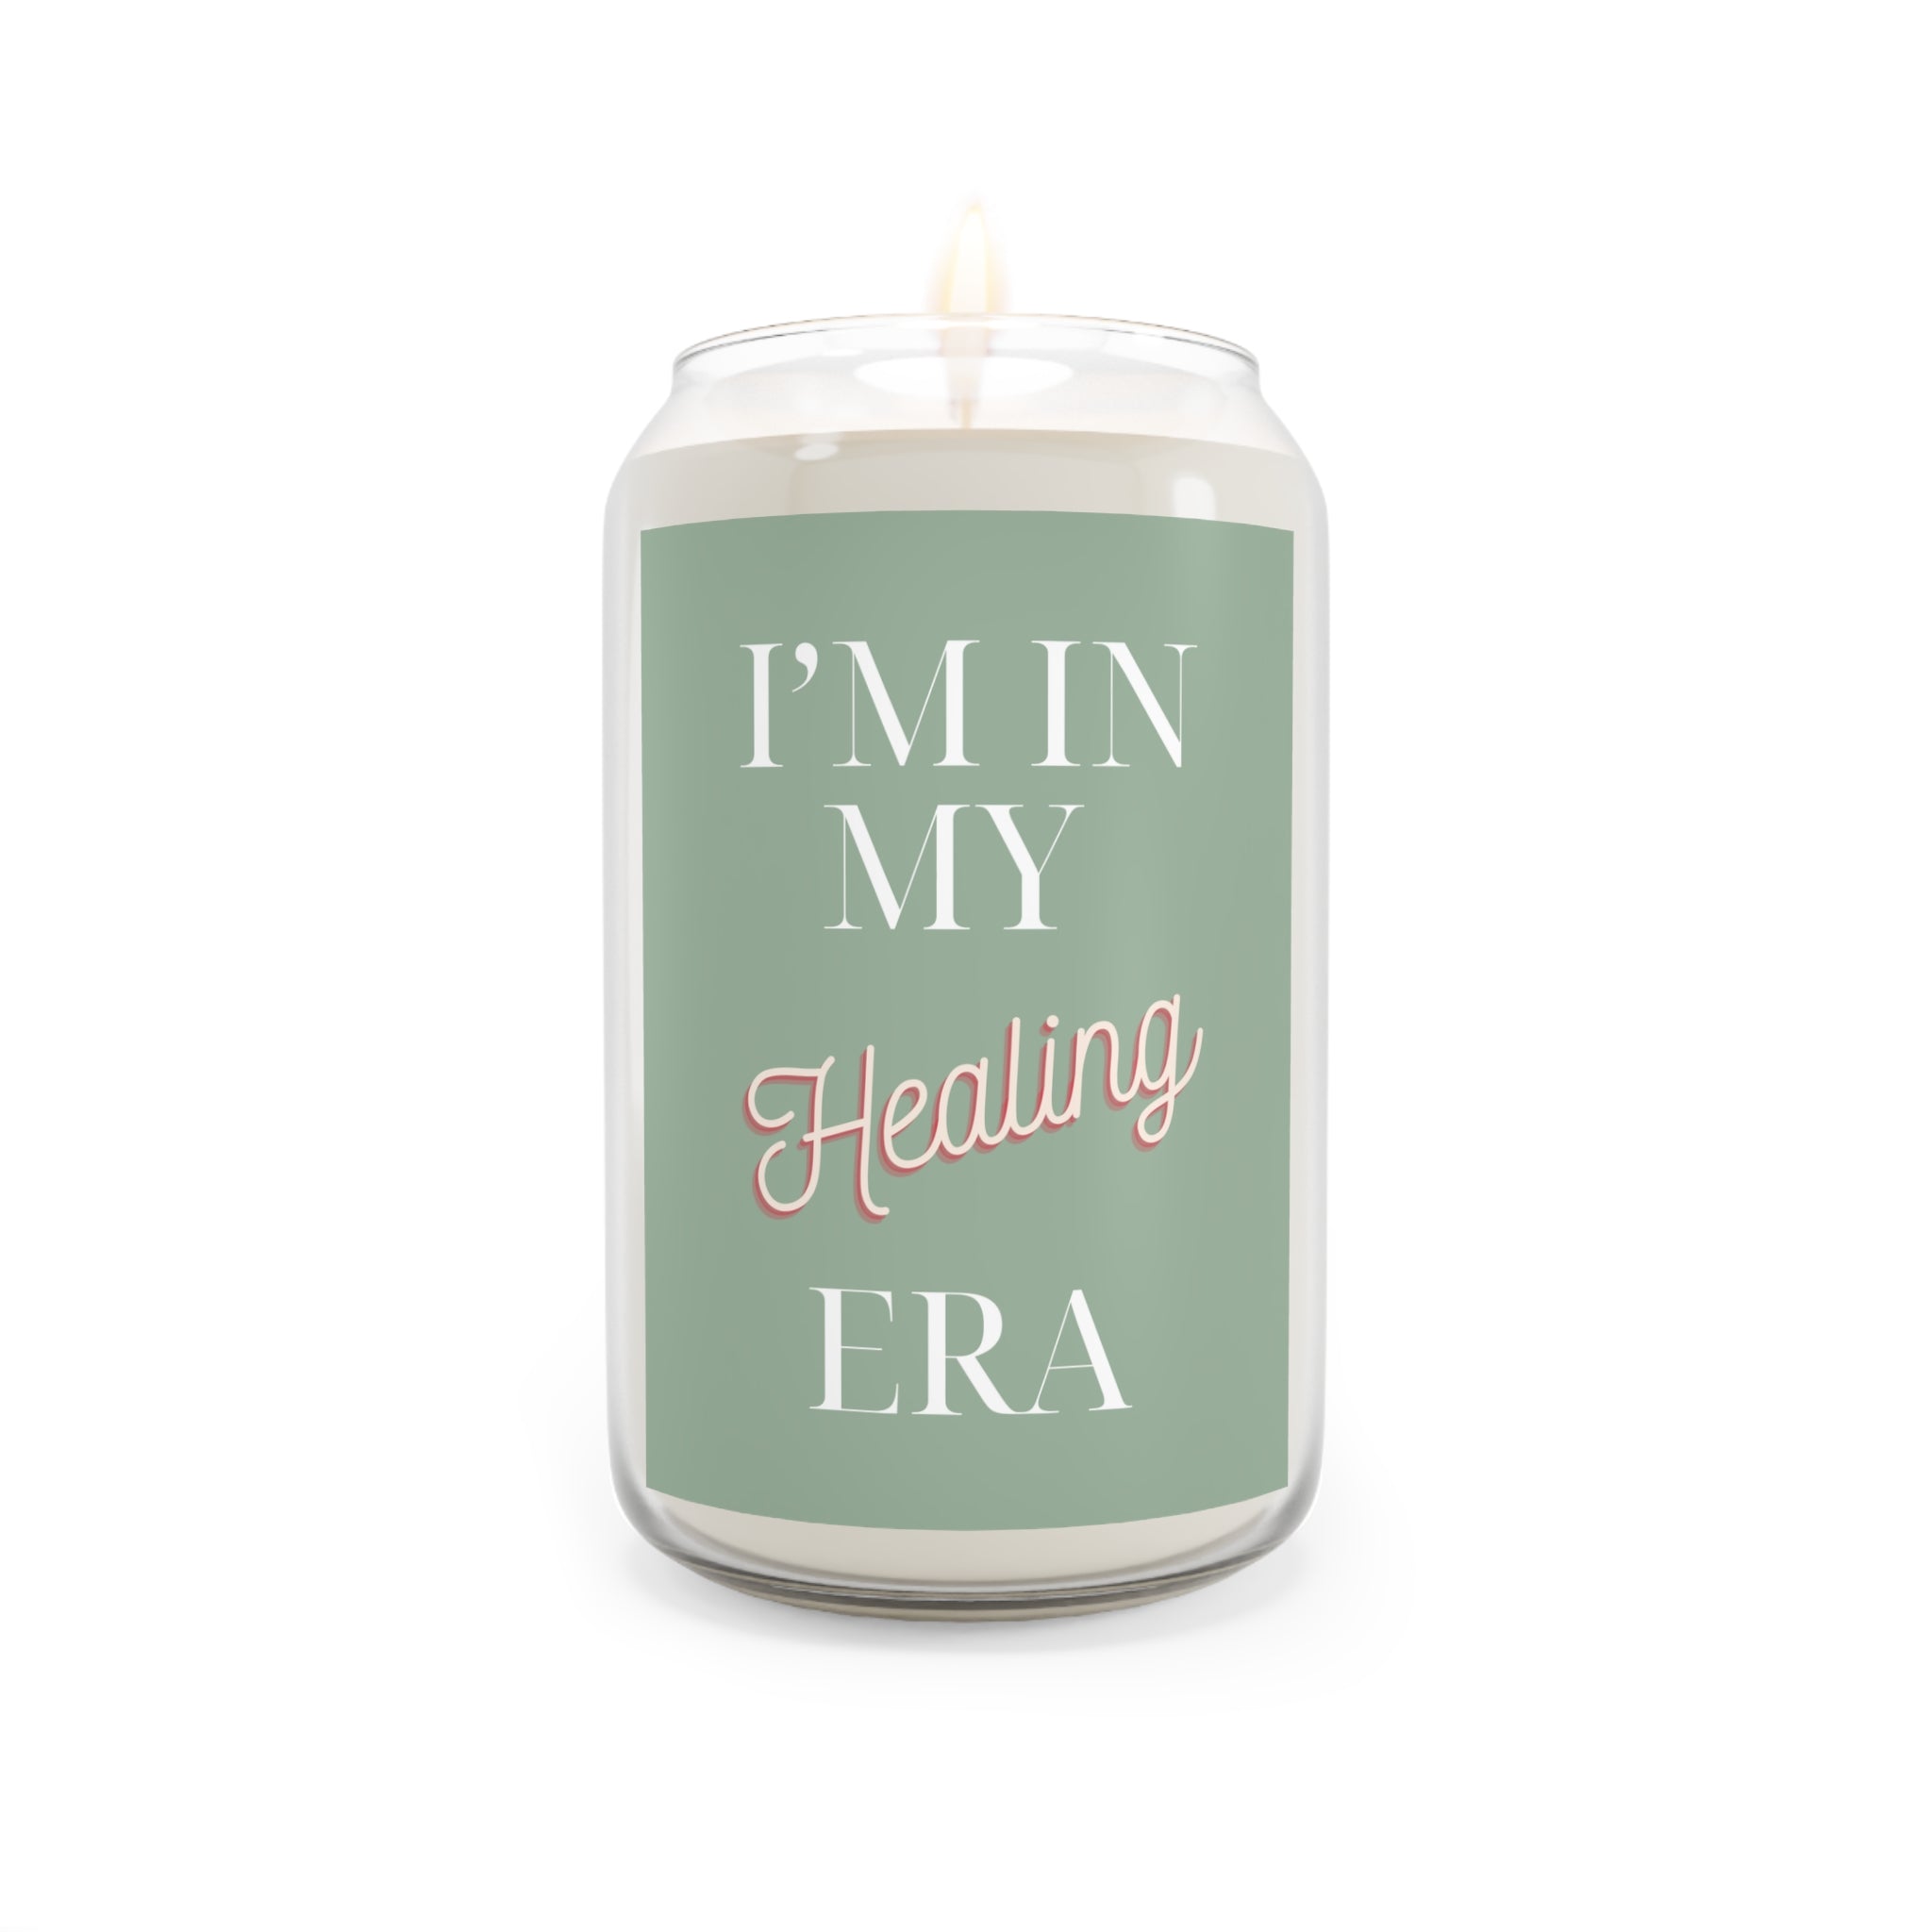 "I'm in my Healing Era" Scented Candle, 13.75oz